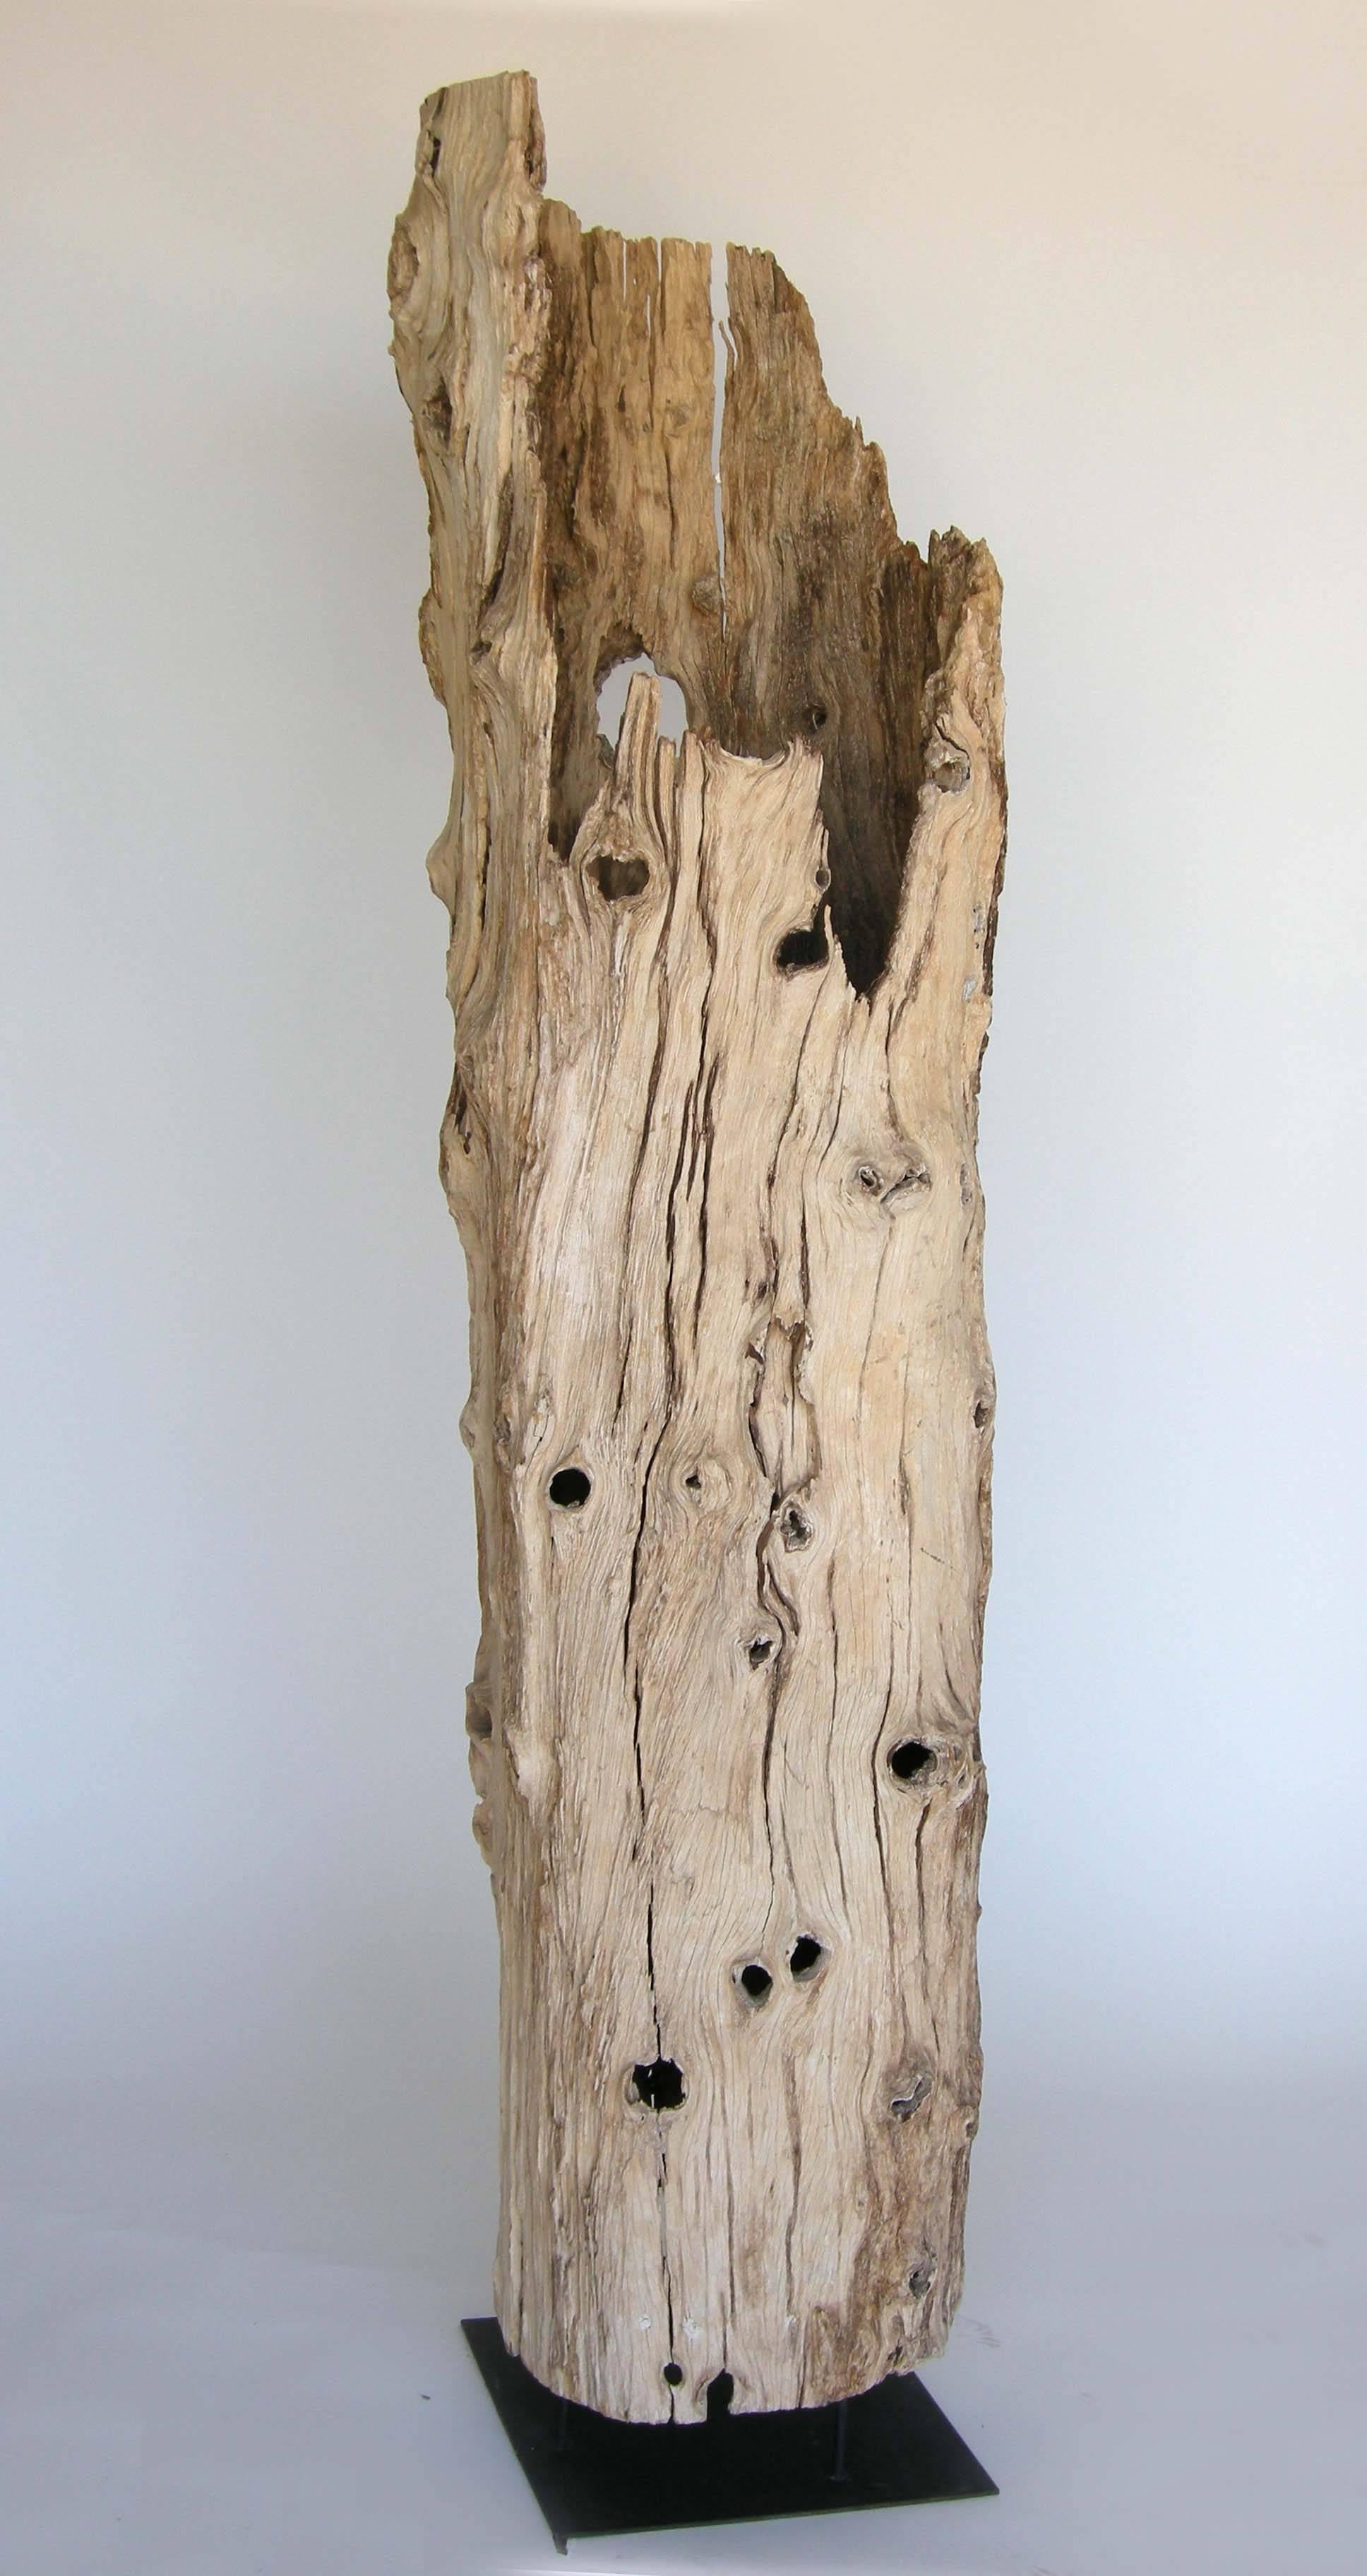 Naturally aged hollow tree trunk. To illuminate the interior, a light can be placed inside. Knots and holes and beautiful beige grey driftwood patina. Custom stand.